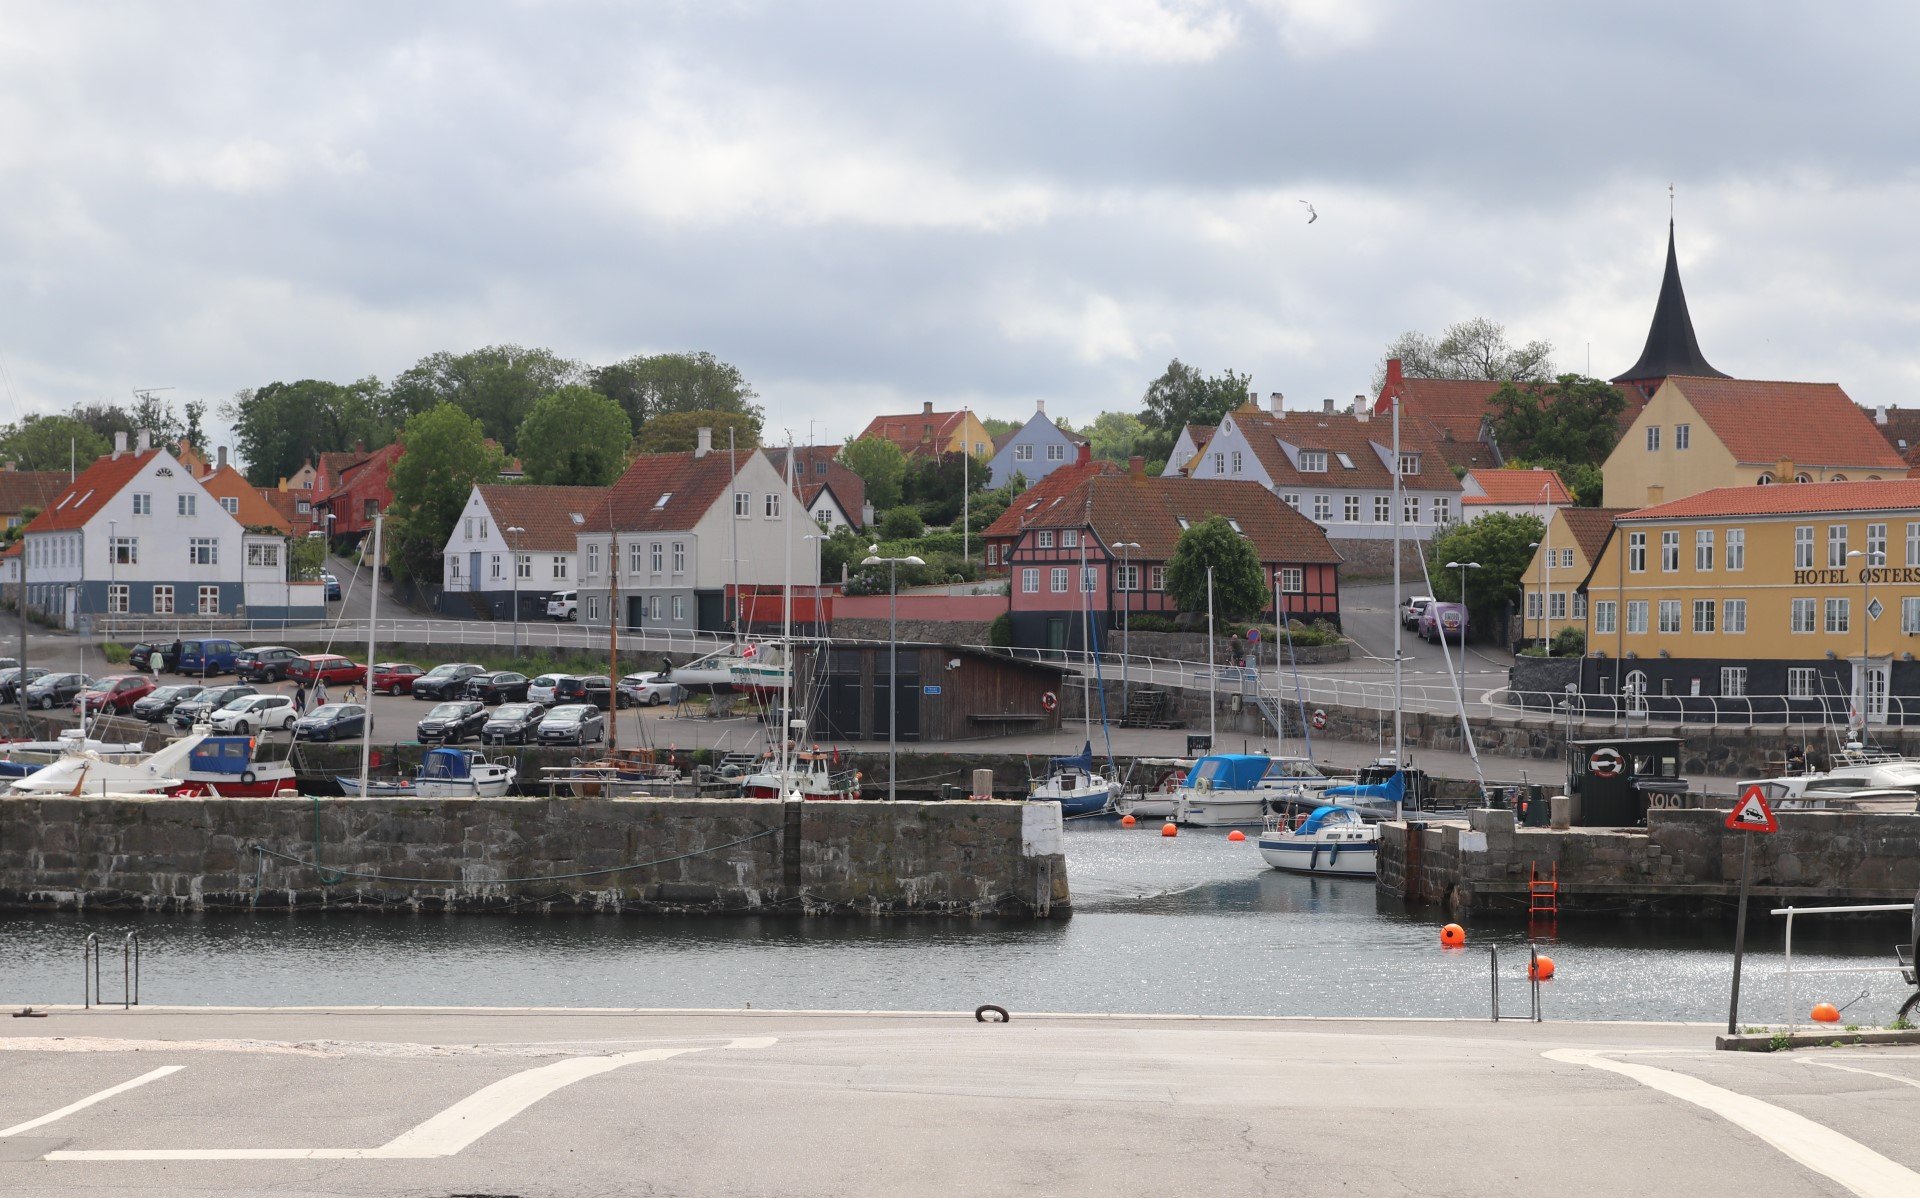 Is it worth going to Bornholm?